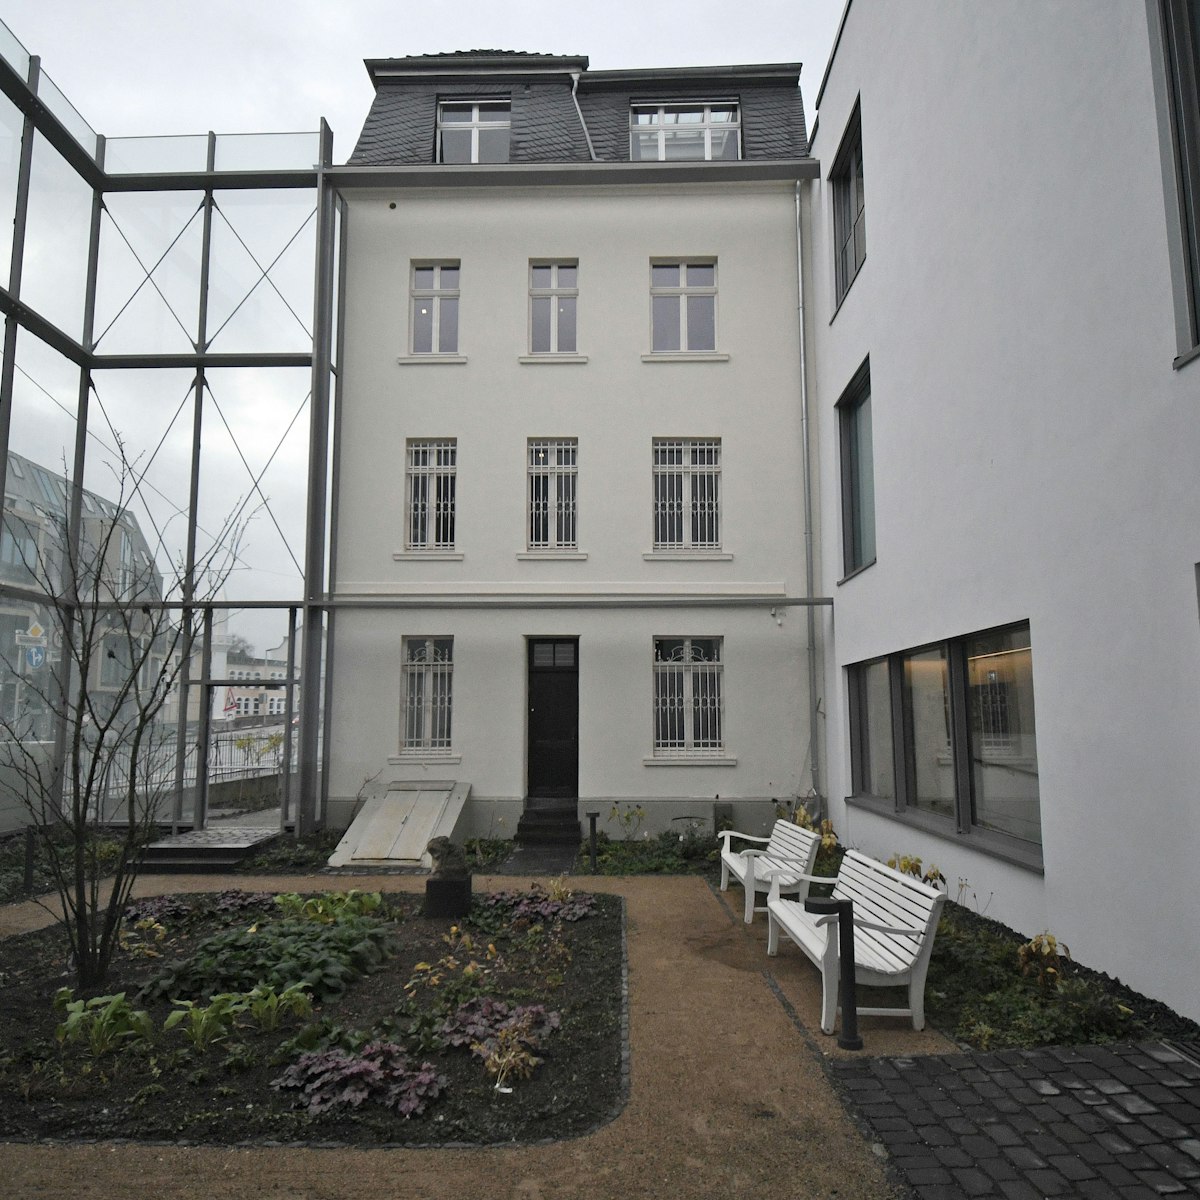 The garden of the August Macke Haus is seperated from the street via a glass wall in Bonn, Germany, 30 November 2017. The former residence and studio of painter August Macke reopens after a reconstruction on 3 December 2017. Photo: Henning Kaiser/dpa (Photo by Henning Kaiser/picture alliance via Getty Images)